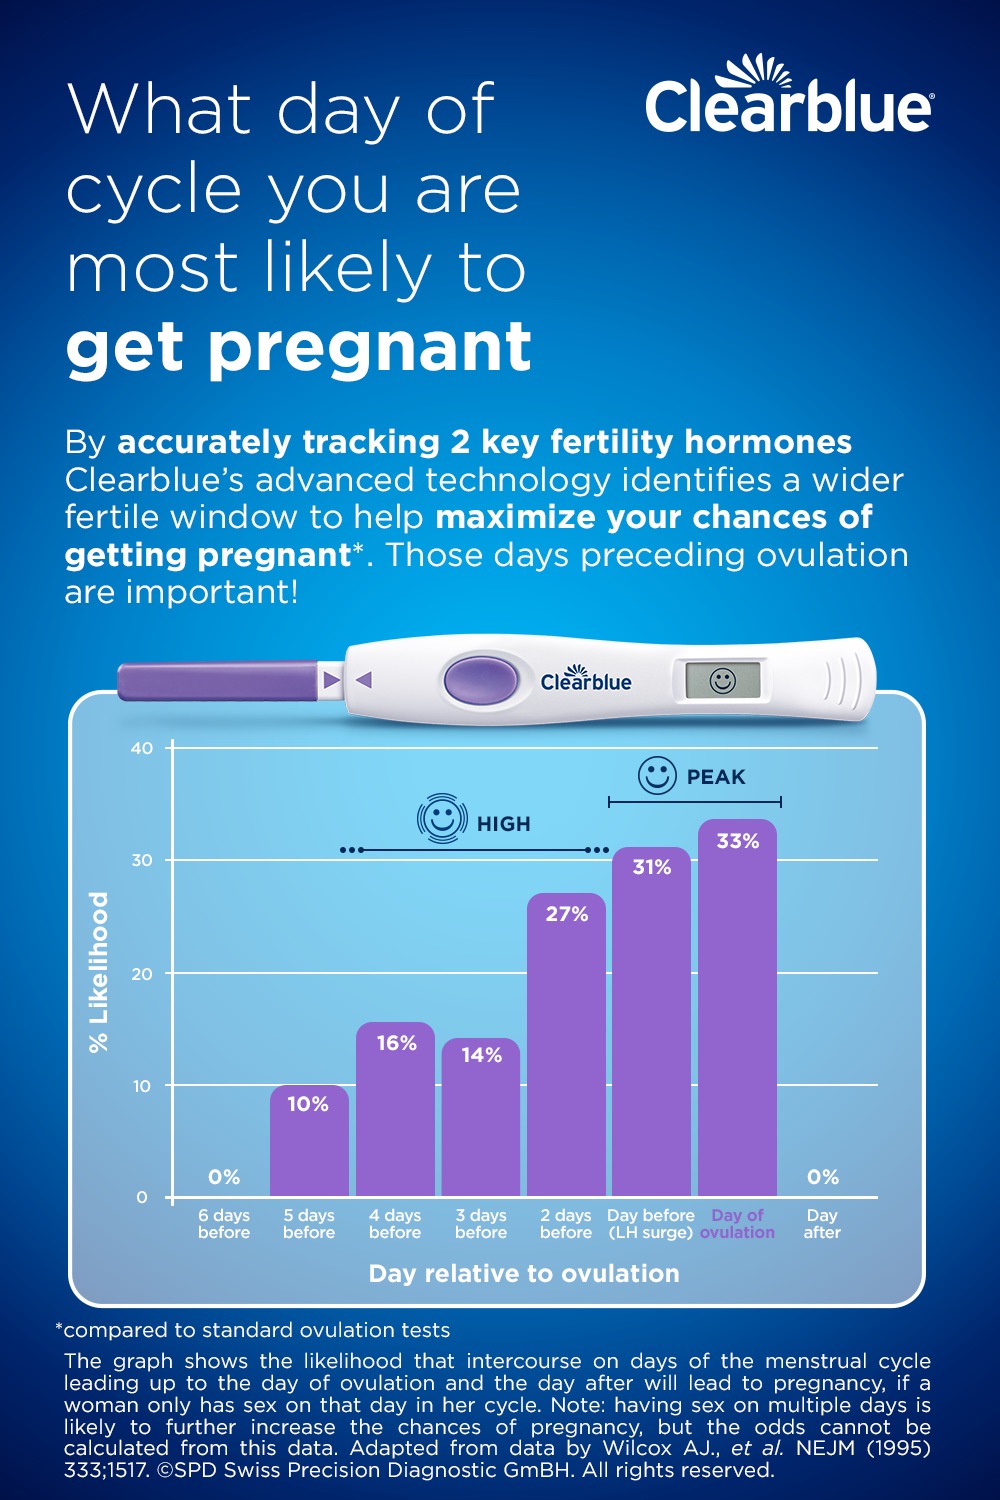 When Are Women Most Fertile? Getting Pregnant by Age & Cycle Date